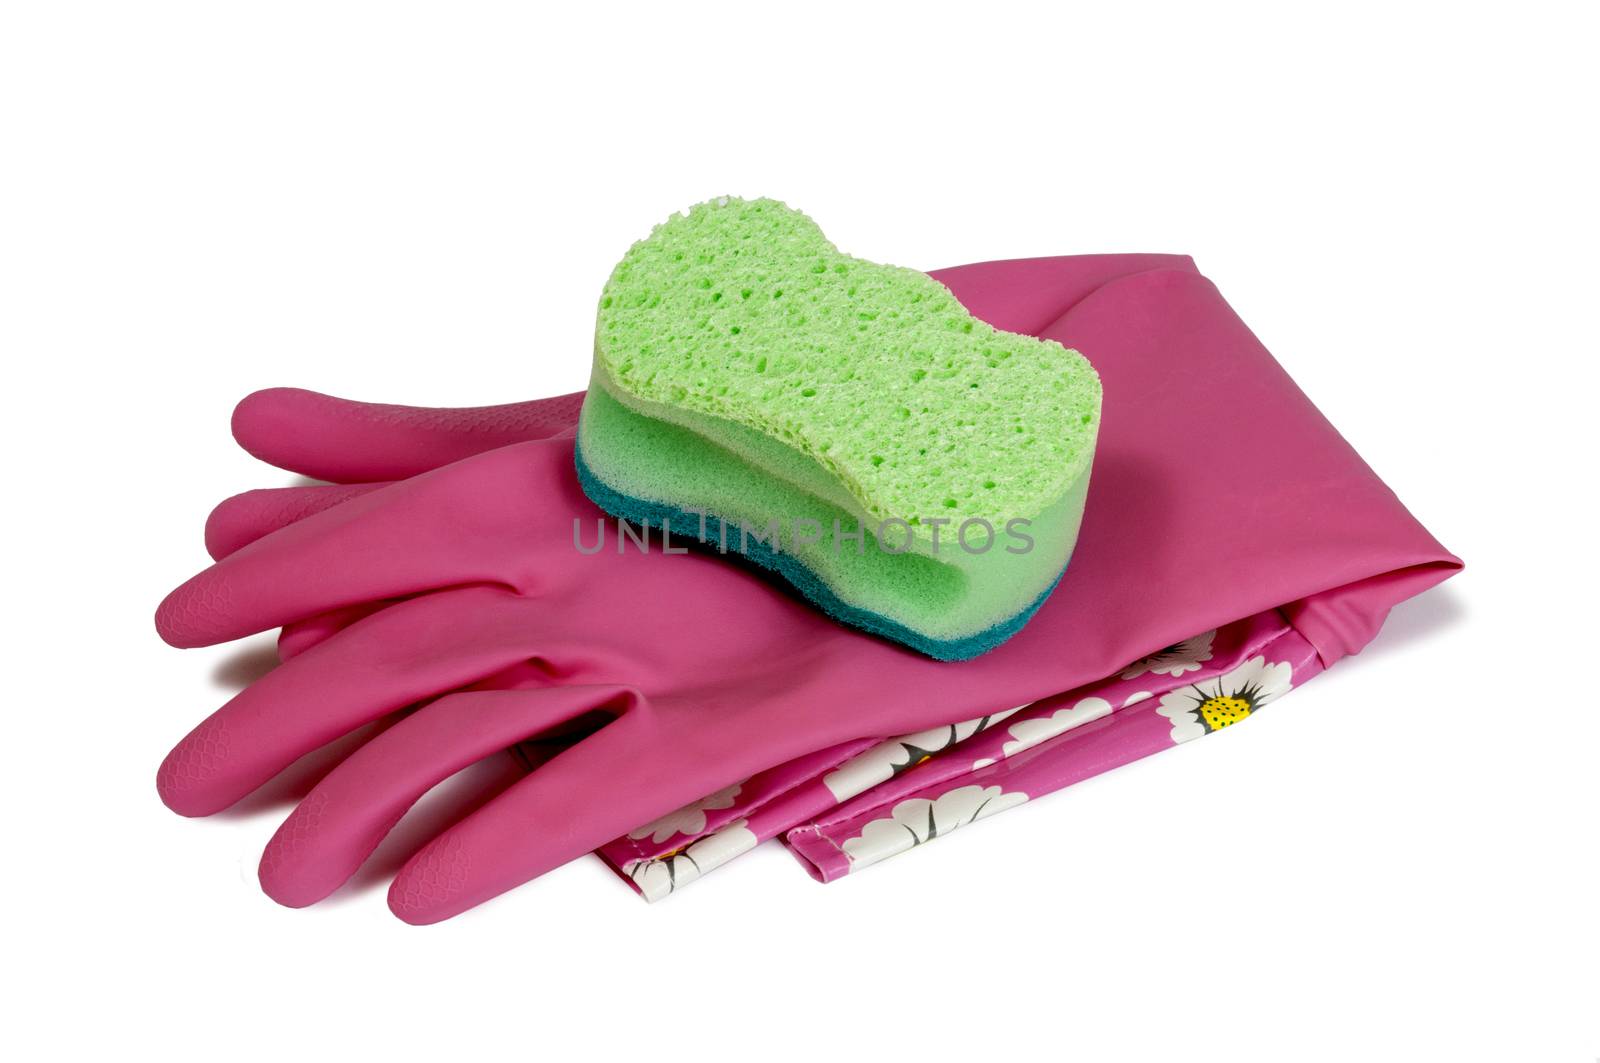 Cleaning Rubber Gloves With Sponge For Cleaning by stockbuster1